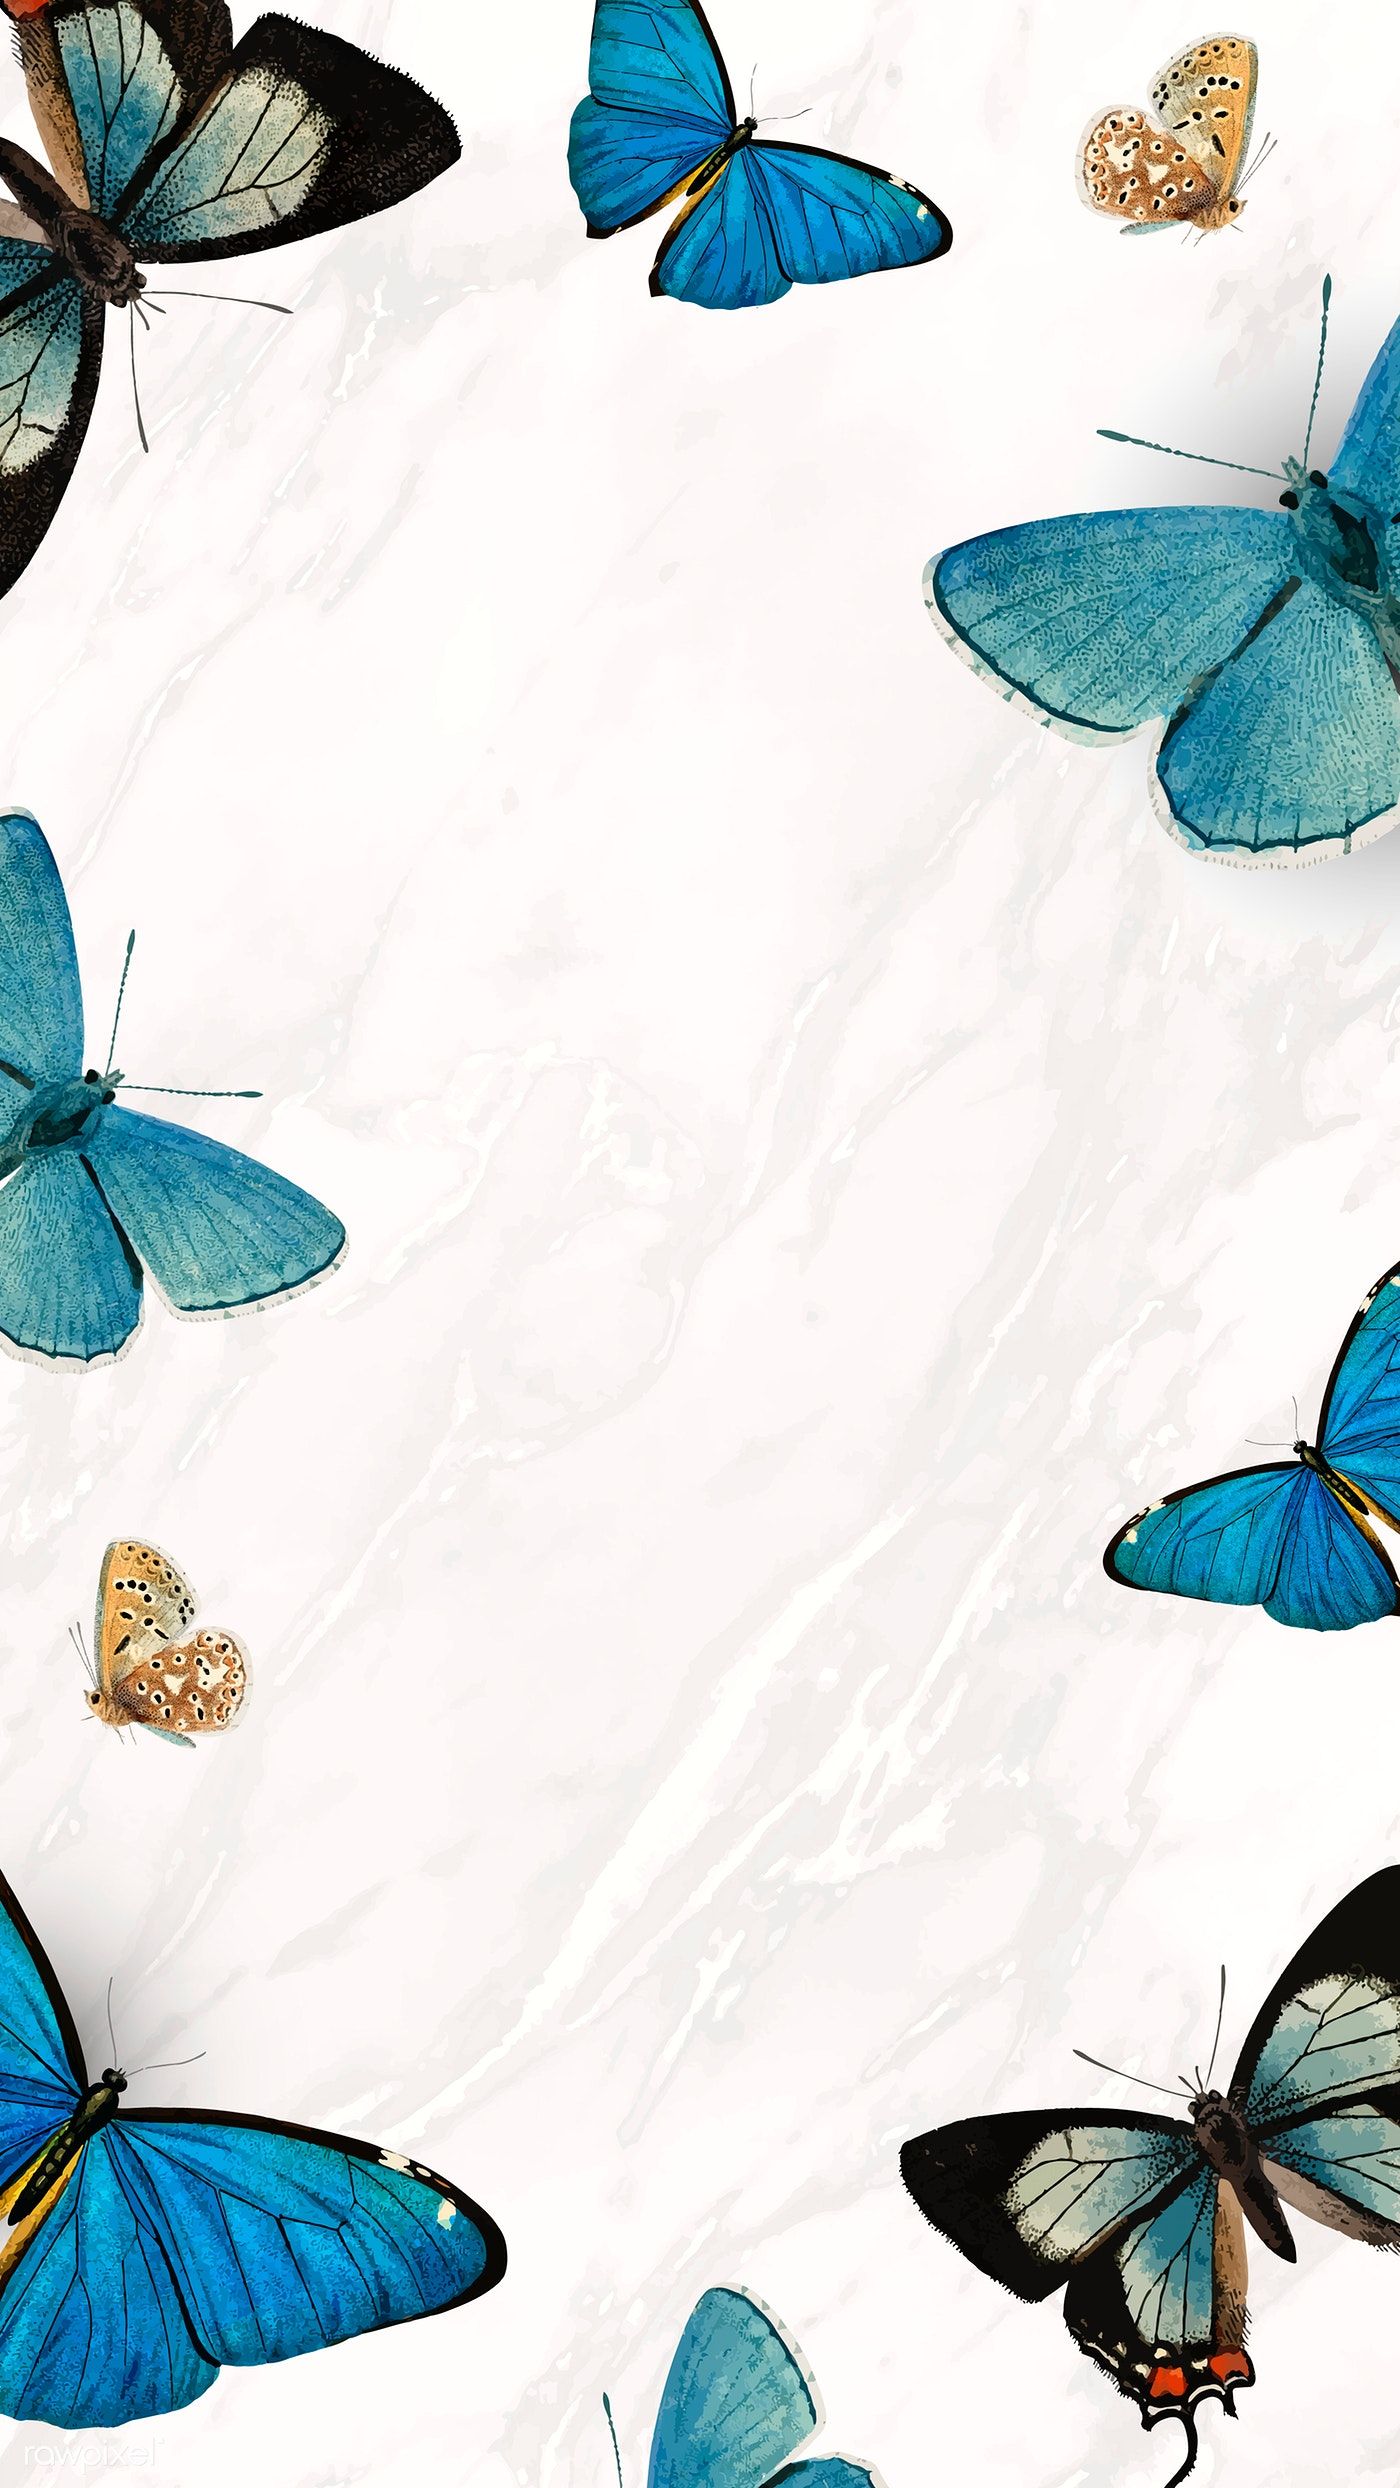 Aesthetic Butterfly iPhone Wallpaper